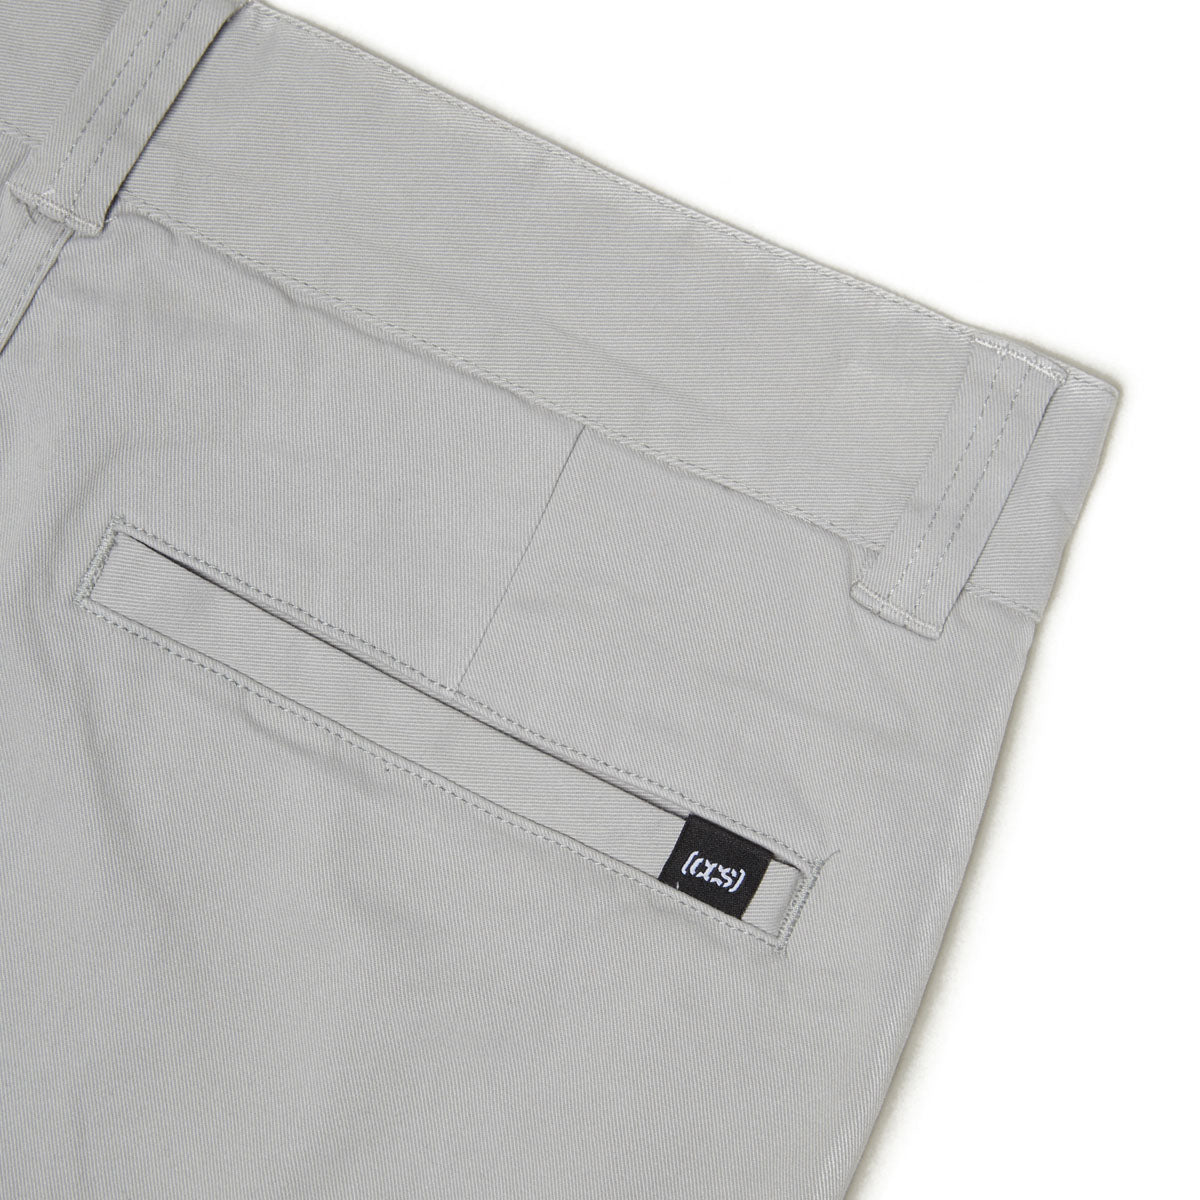 CCS Standard Plus Relaxed Chino Pants - Dove Grey image 6